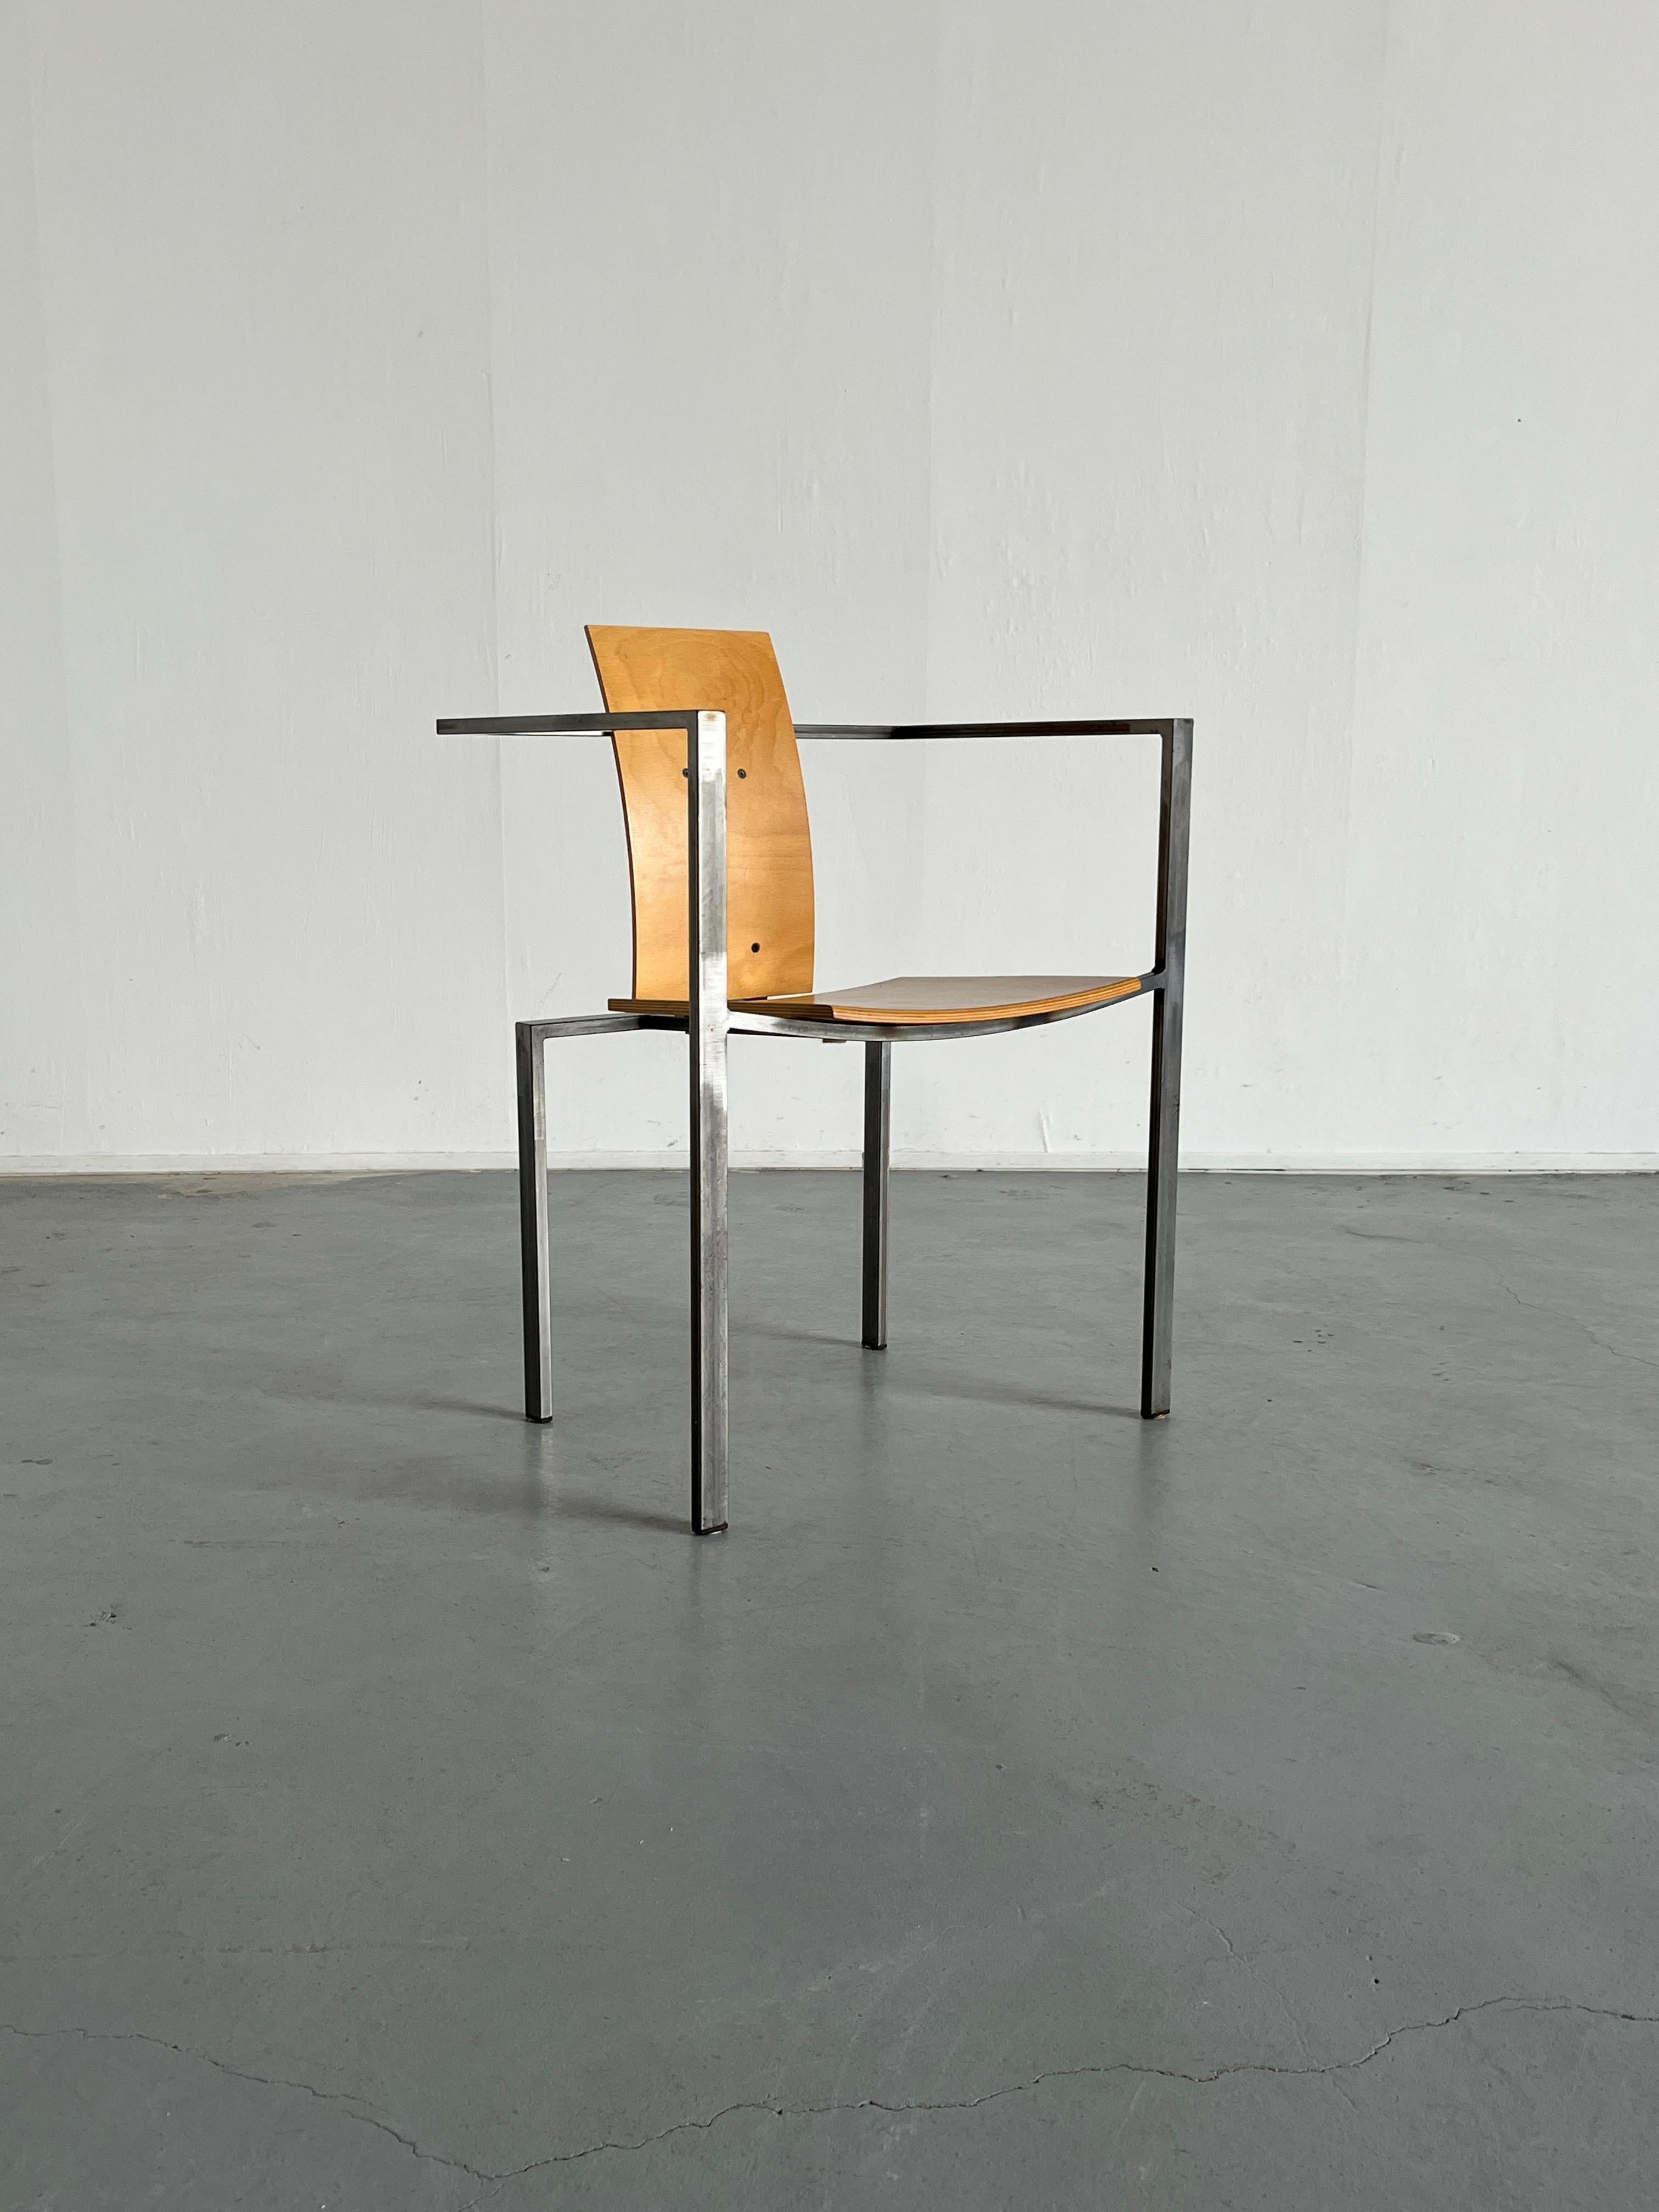 A steel and plywood postmodern chair designed in the 1980s in Germany by Karl Friedrich Förste for KFF, his own manufacturing company. 
Unique, geometrical and Memphis-influenced design, in an industrial style production

Overall well preserved with